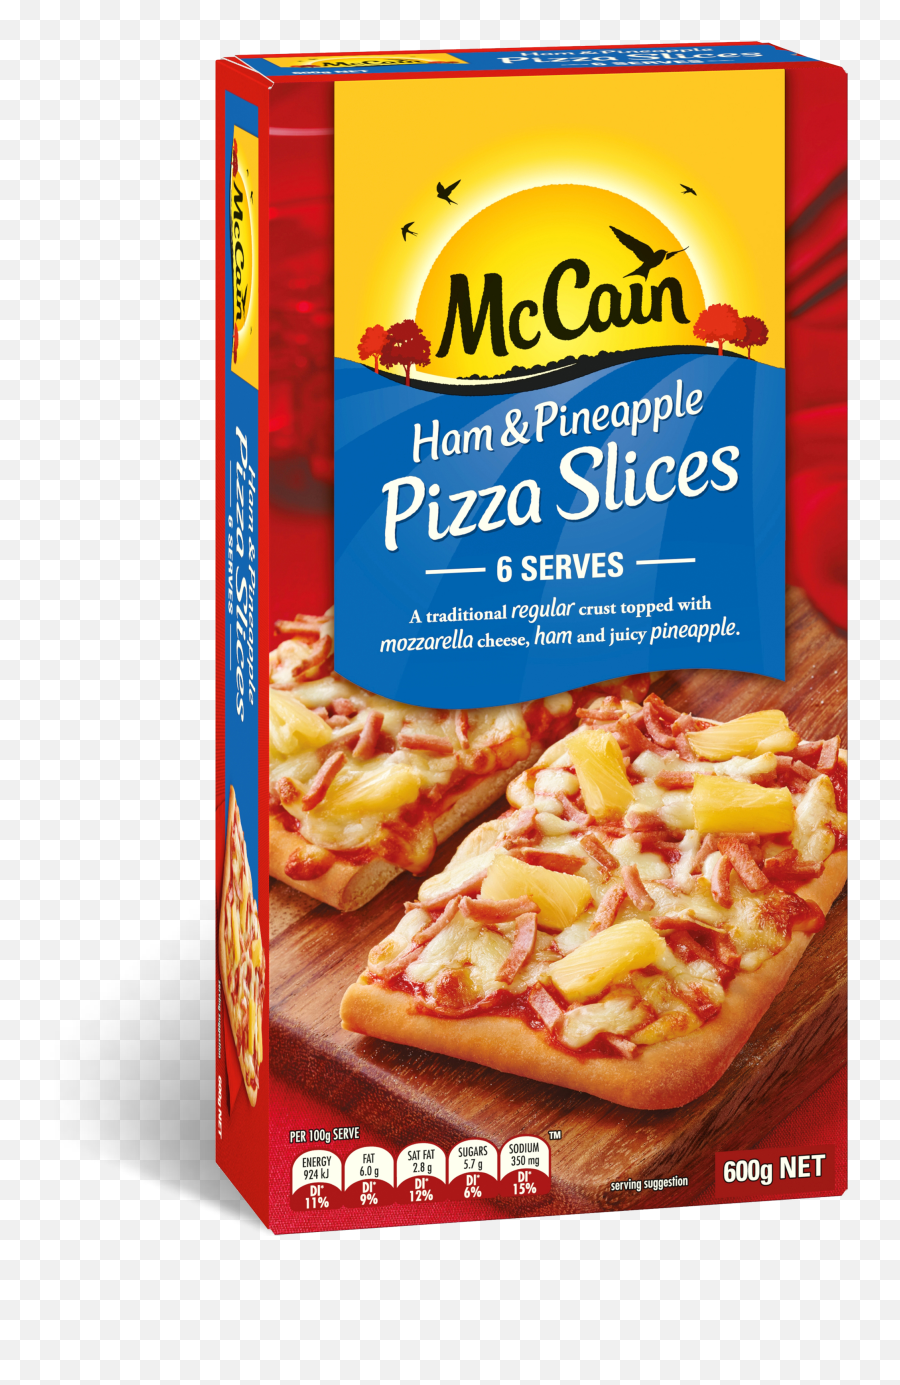 Pizza Slice Png - Mccain Pizza Squares,Pizza Slice Png